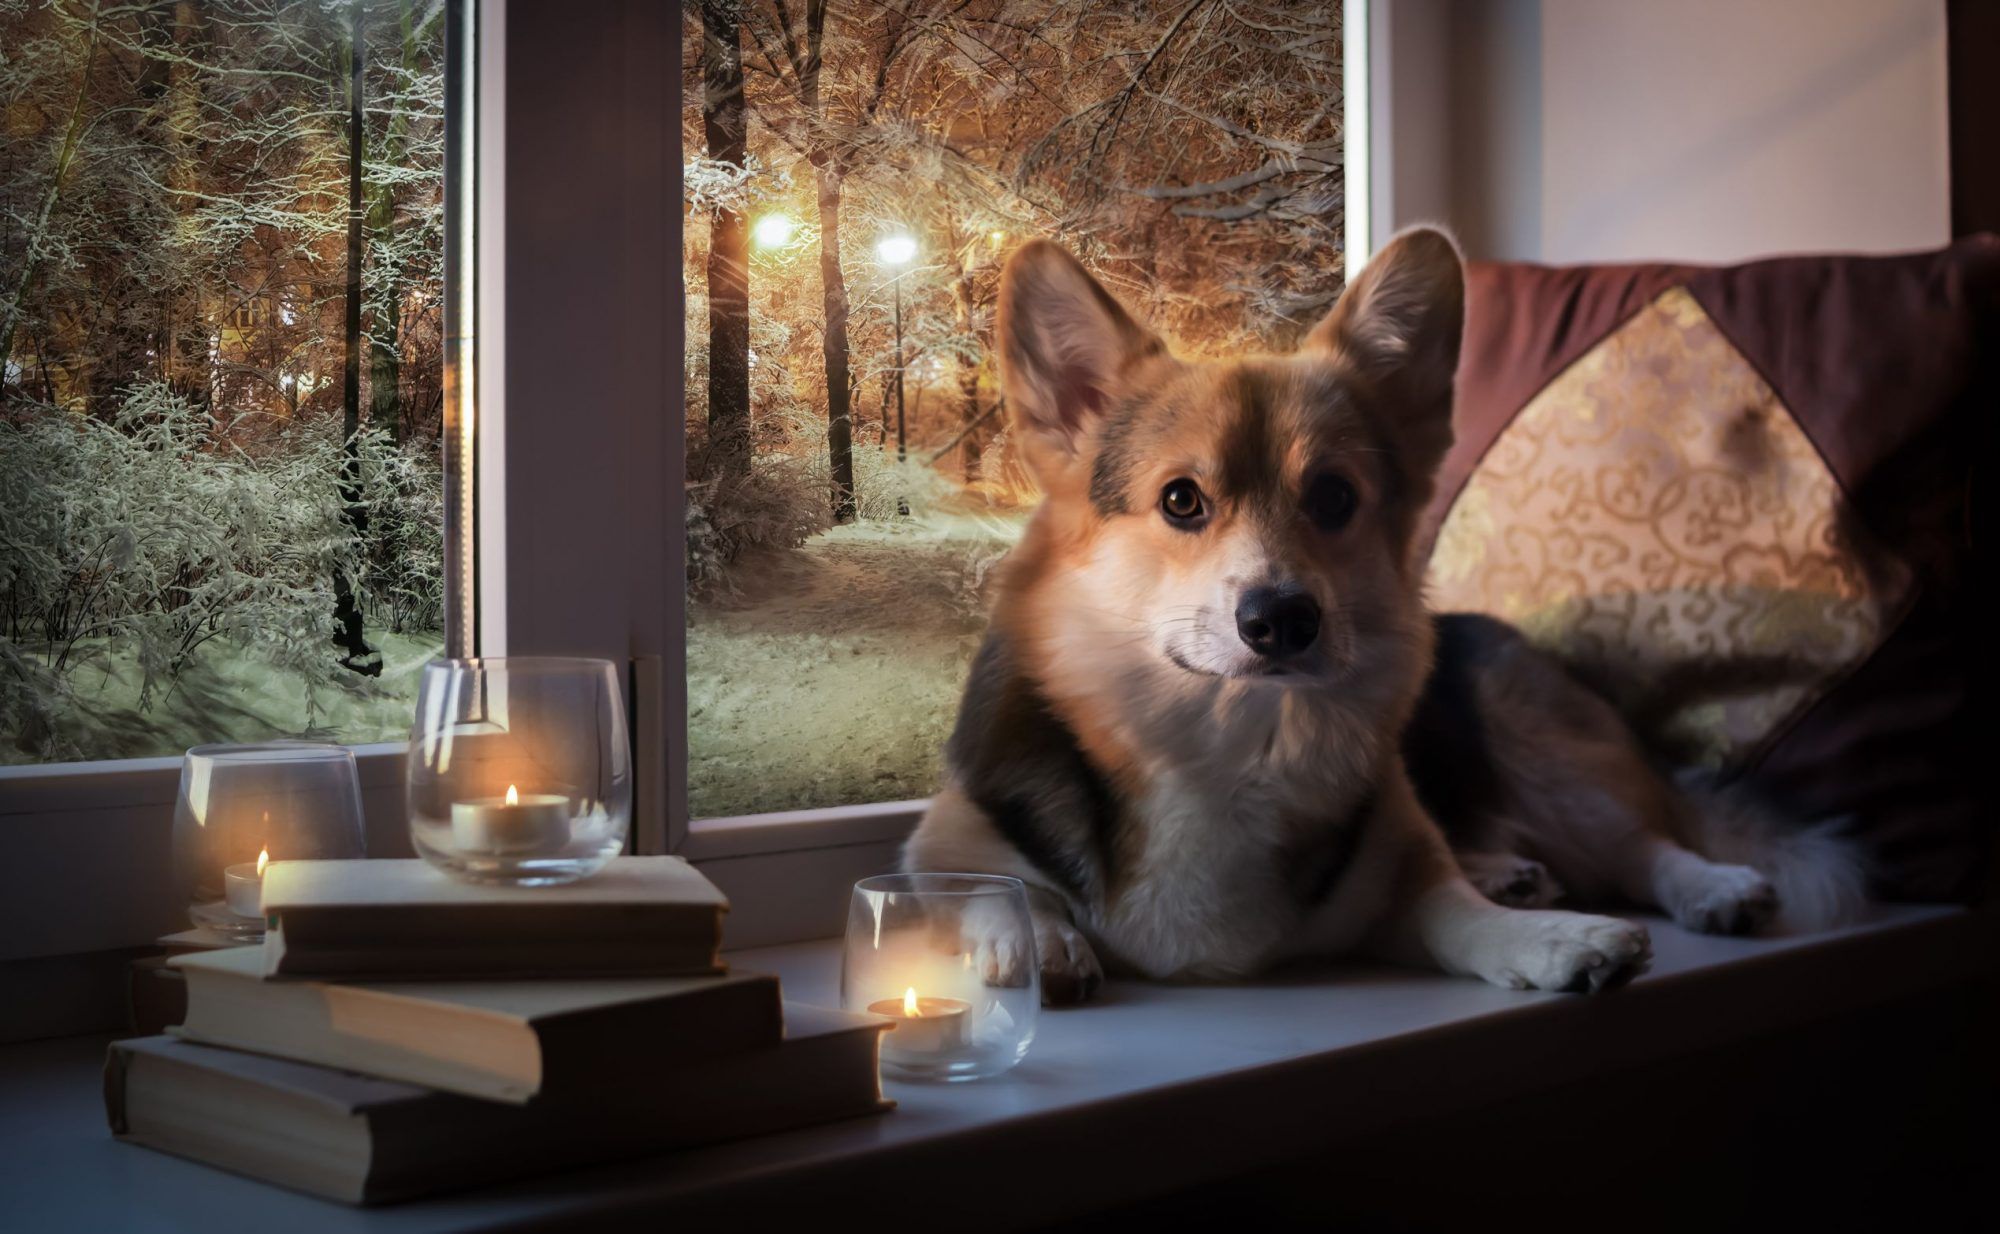 Problematic Trends: Home Decor & Seasonal Trends Not Safe for Pets